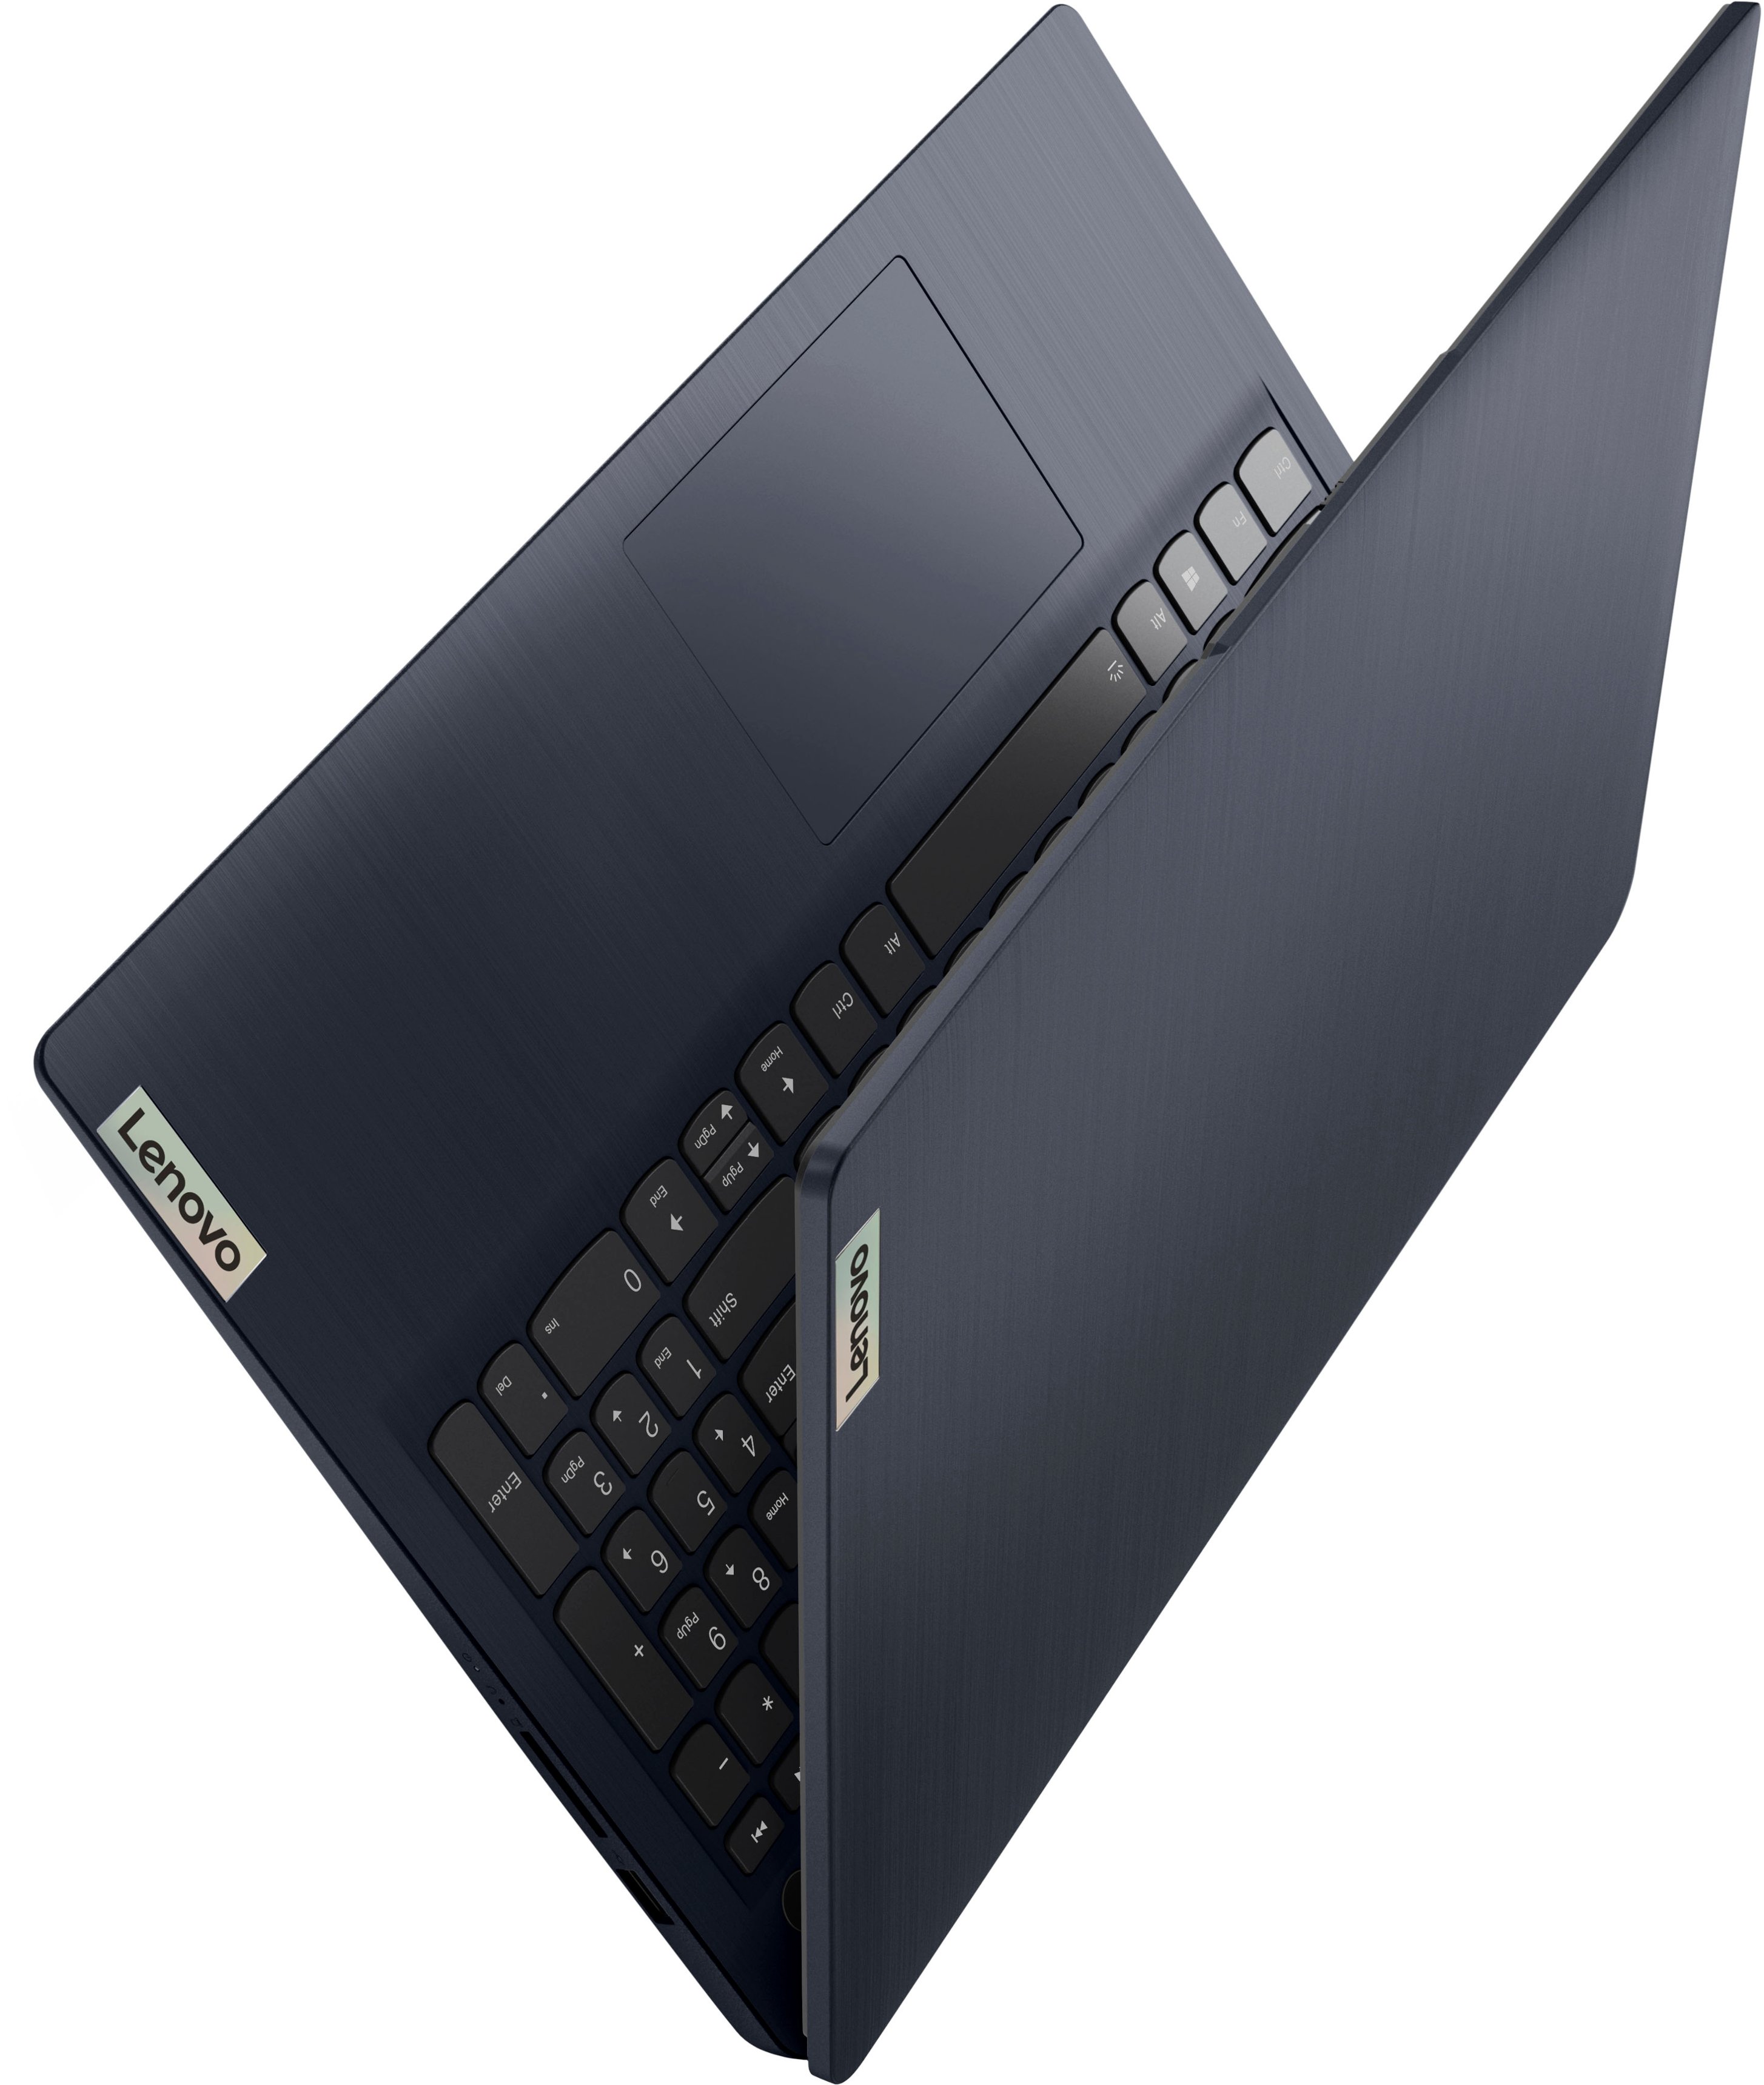 Lenovo Ideapad 3i 15.6 FHD Touch Laptop Core i3-1115G4 with 8GB Memory  256GB SSD Arctic Grey 82H803SDUS - Best Buy